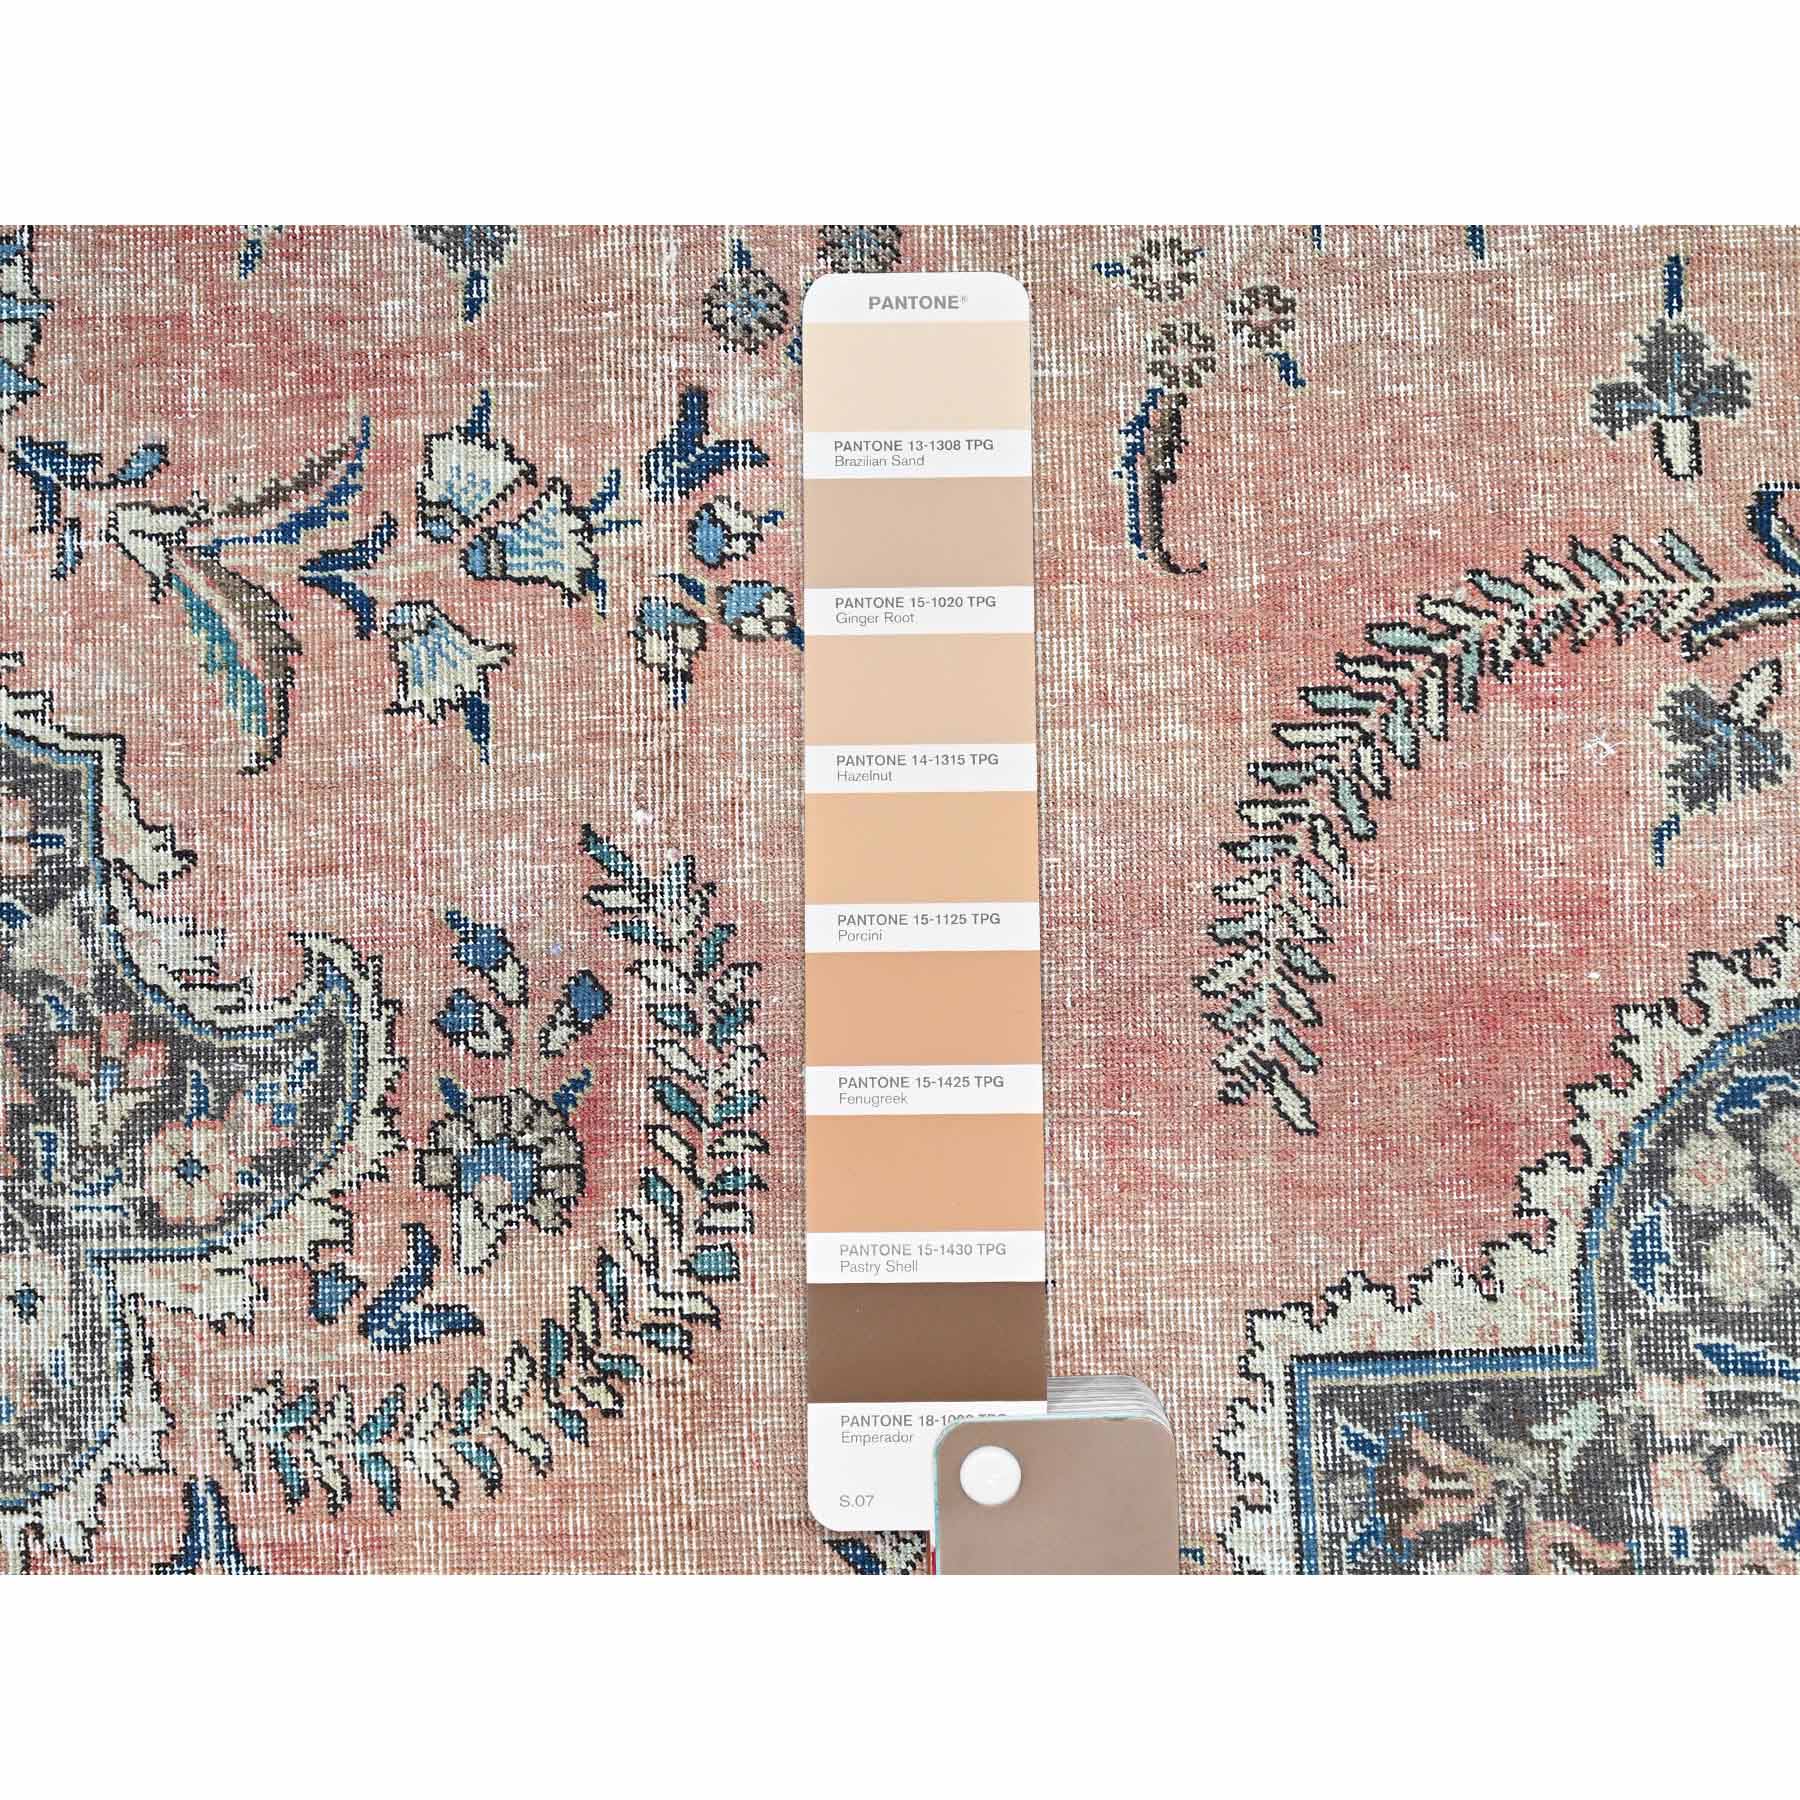 Overdyed-Vintage-Hand-Knotted-Rug-430570